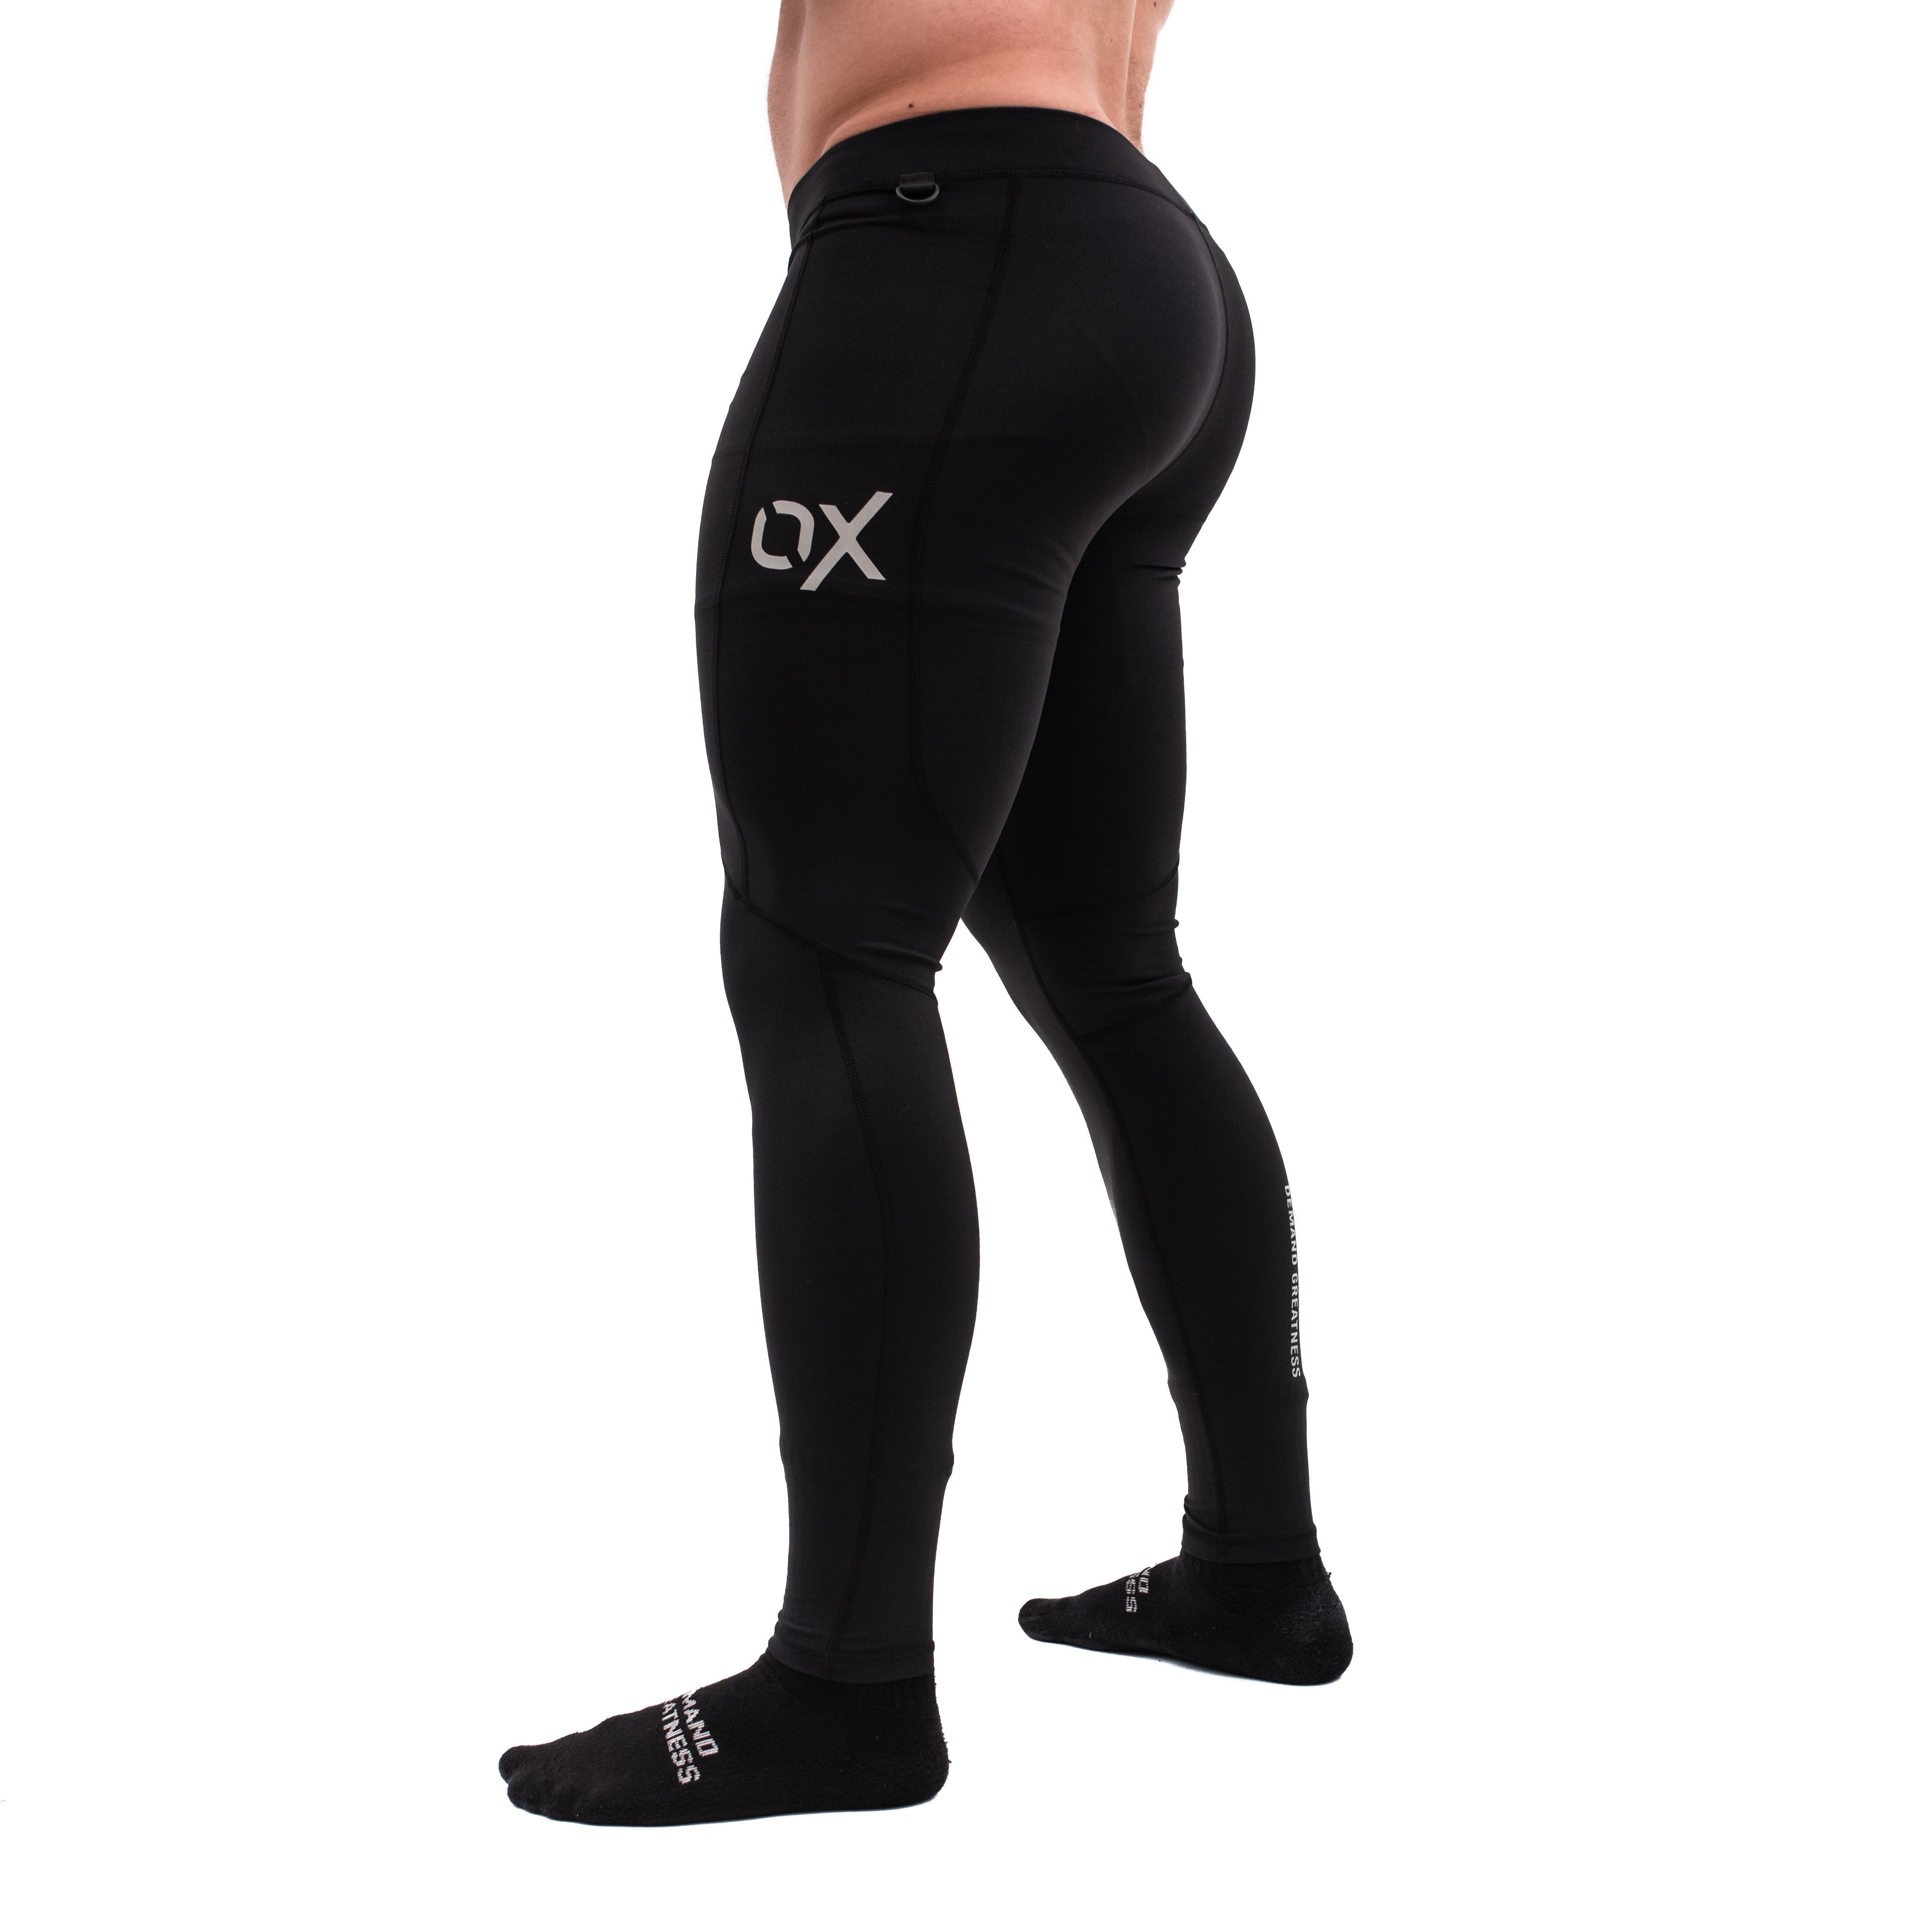 Compression pants for the powerlifter and weightlifter. Perfect powerlifting apparel providing maximum comfort. A7 has IPF approved powerlifting apprel and is perfect for Powerlifring, weightlifting, strongman and all your strength sports needs. Shipping to Europe and the UK, Norway, Switzerland and Iceland.